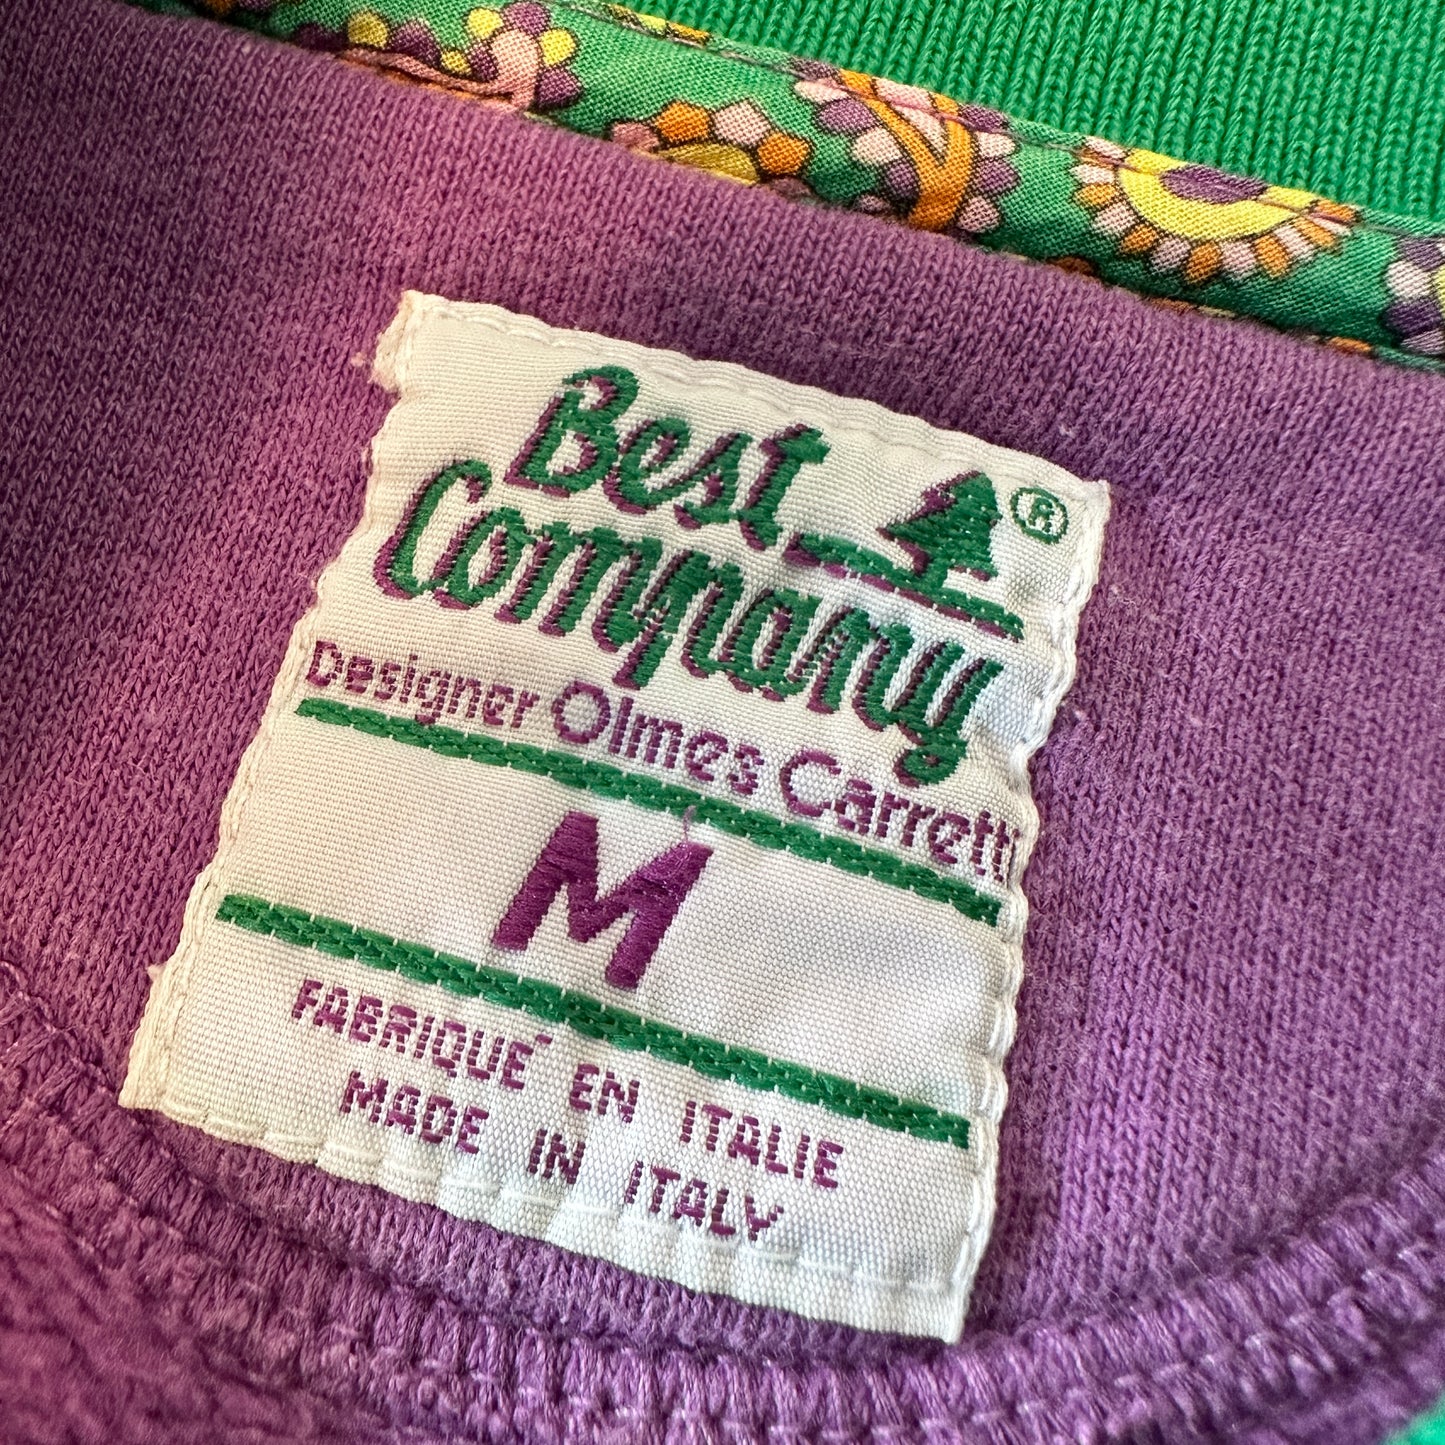 Best Company 80s Vintage "B.C." Polo Sweatshirt- M - Made in Italy